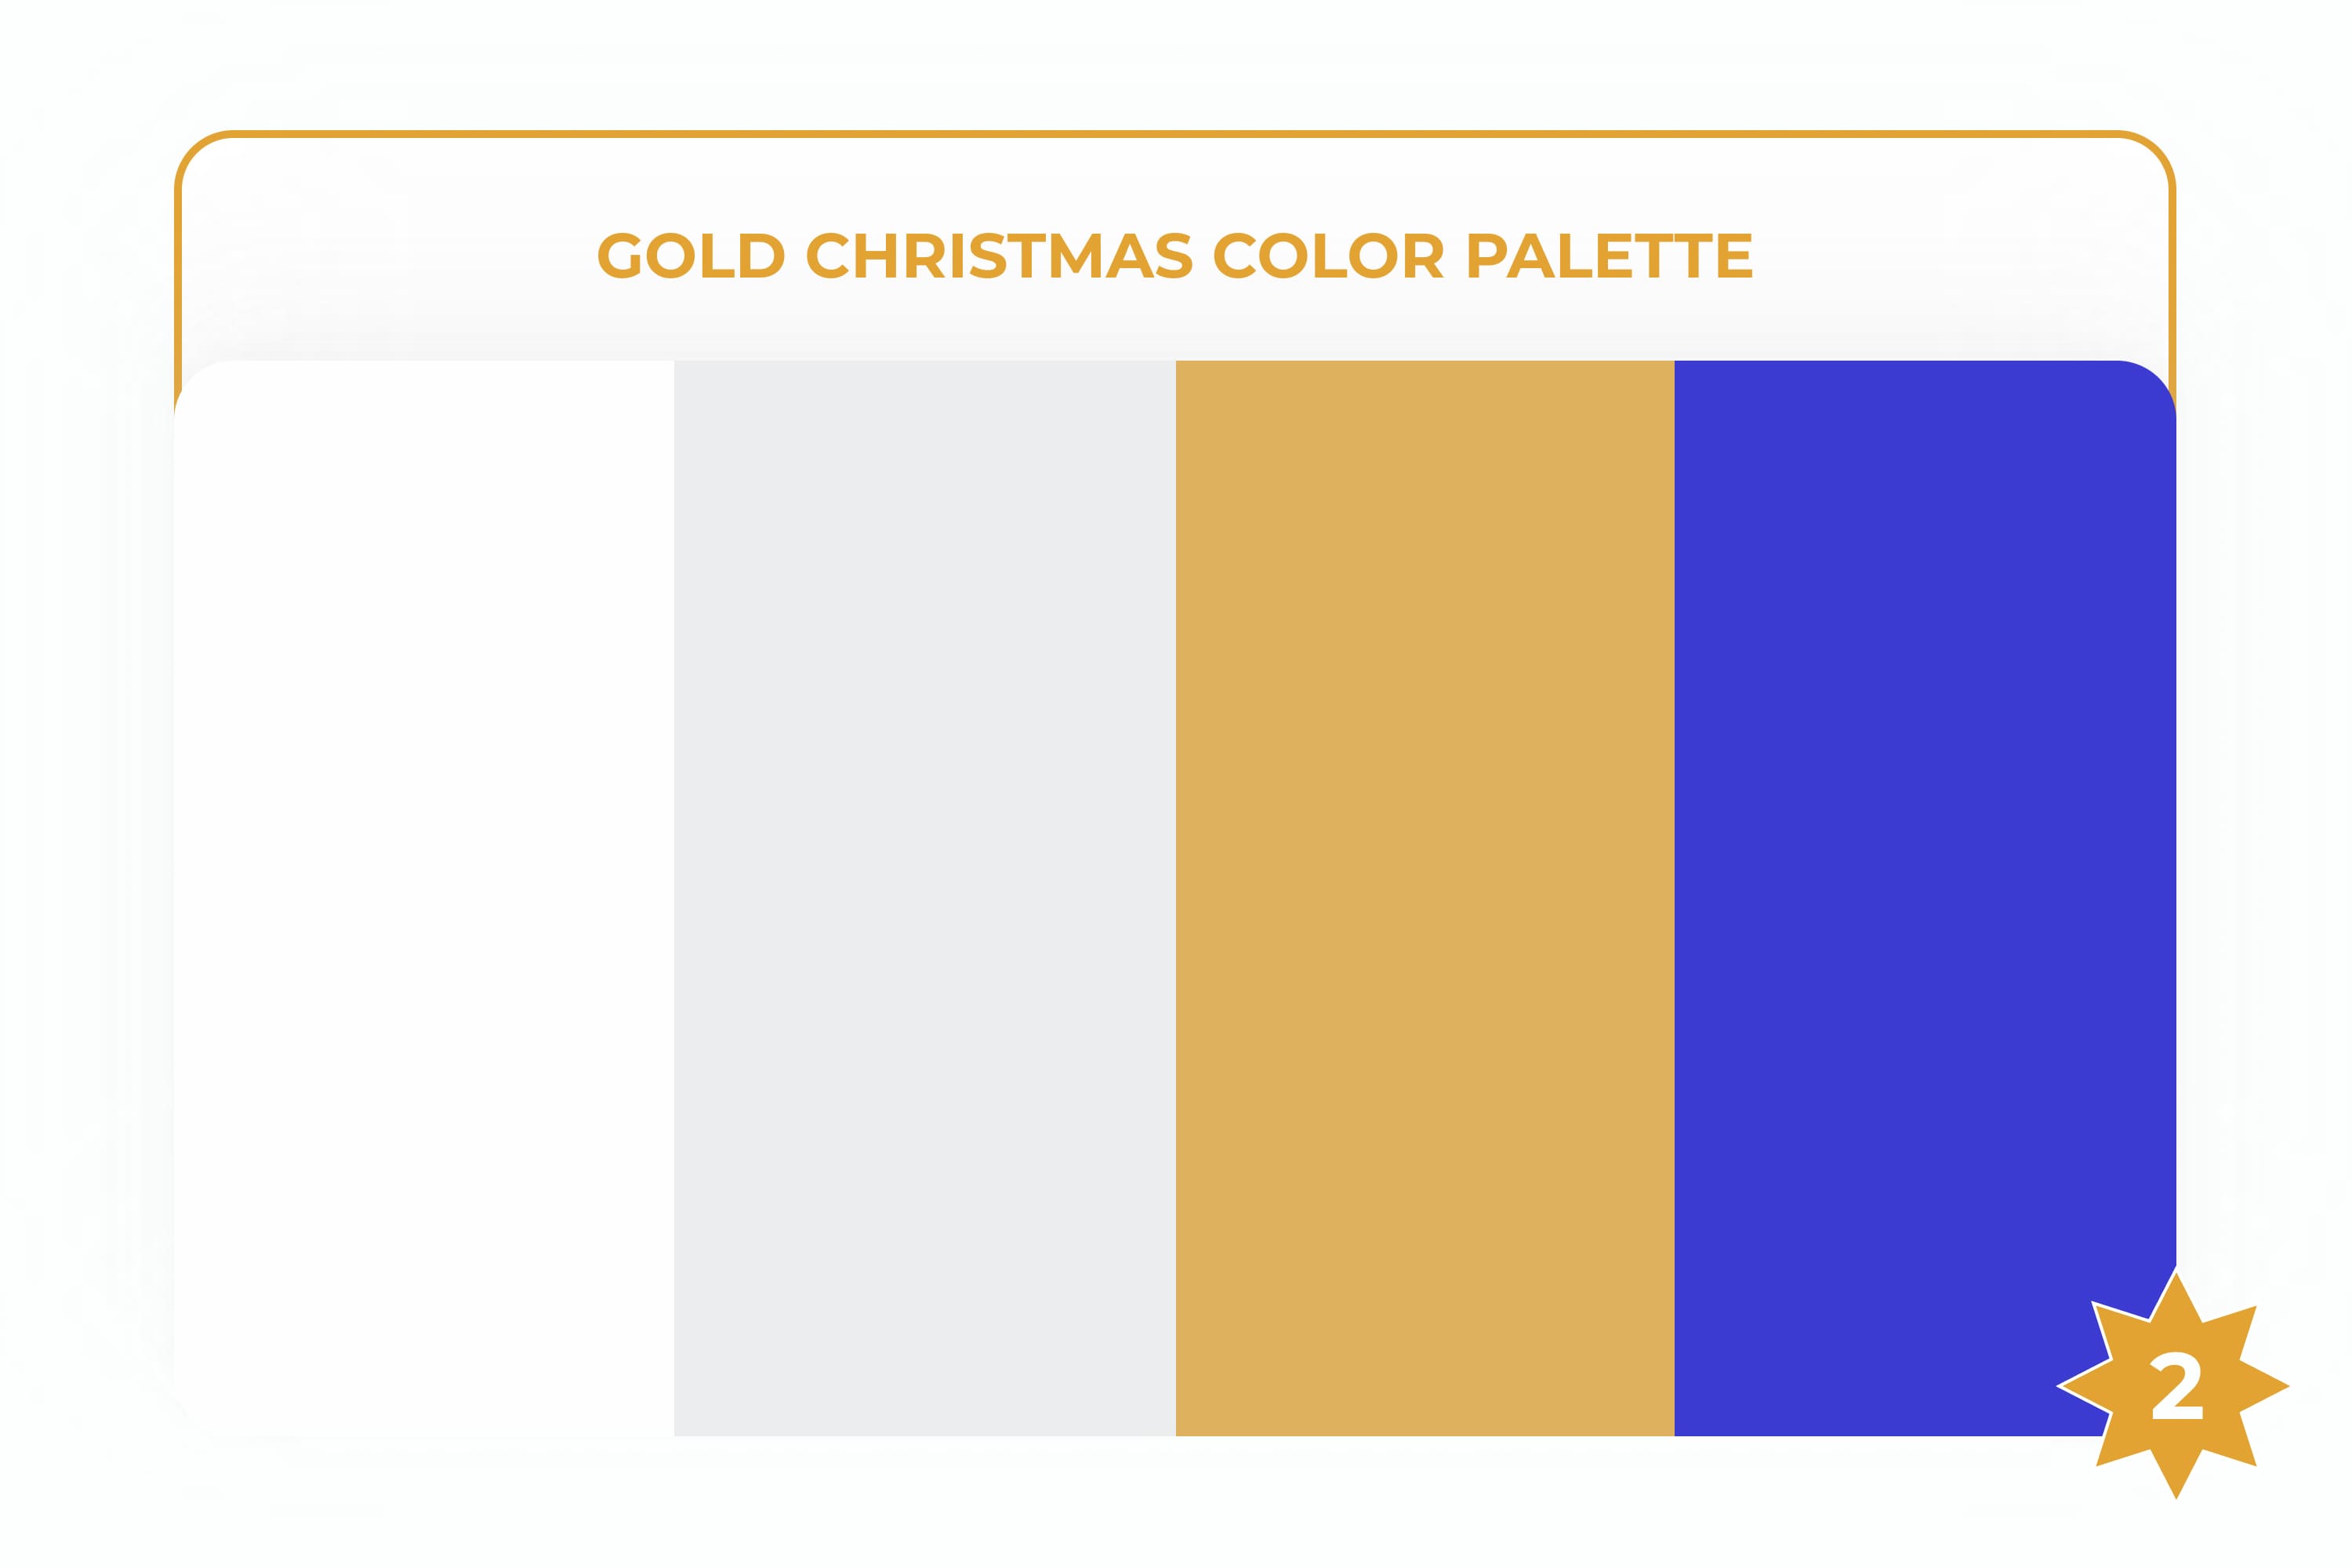 Collage of colored stripes in a gold palette with white and blue.